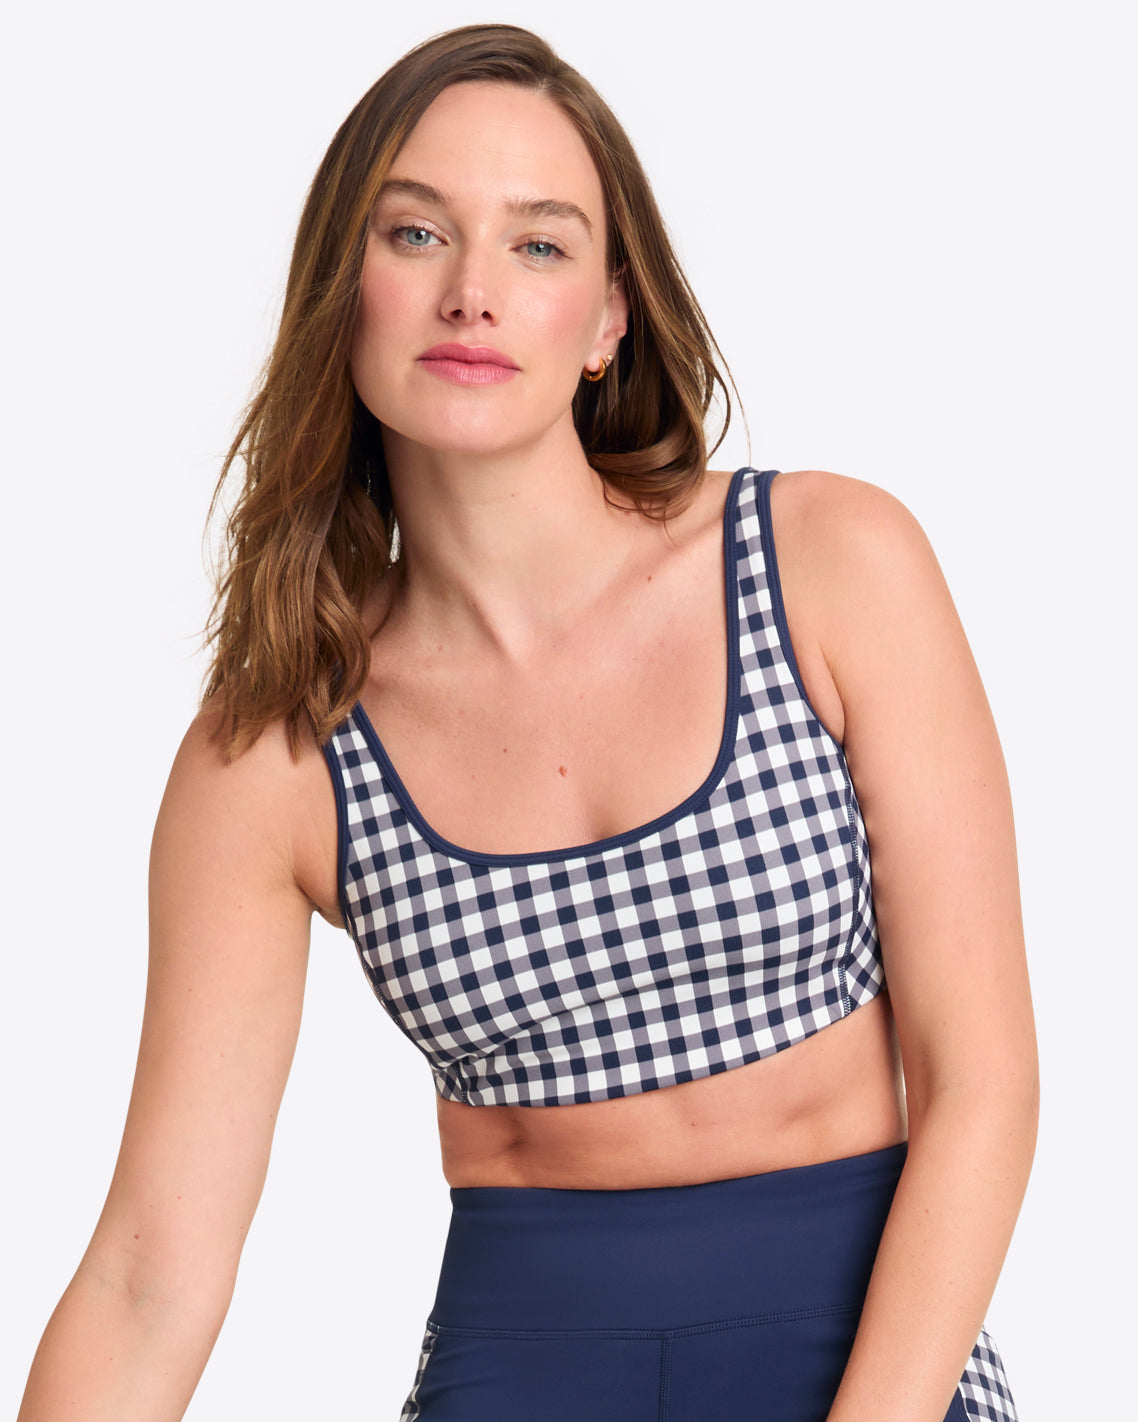 Sexy Sports Bra, Shop The Largest Collection